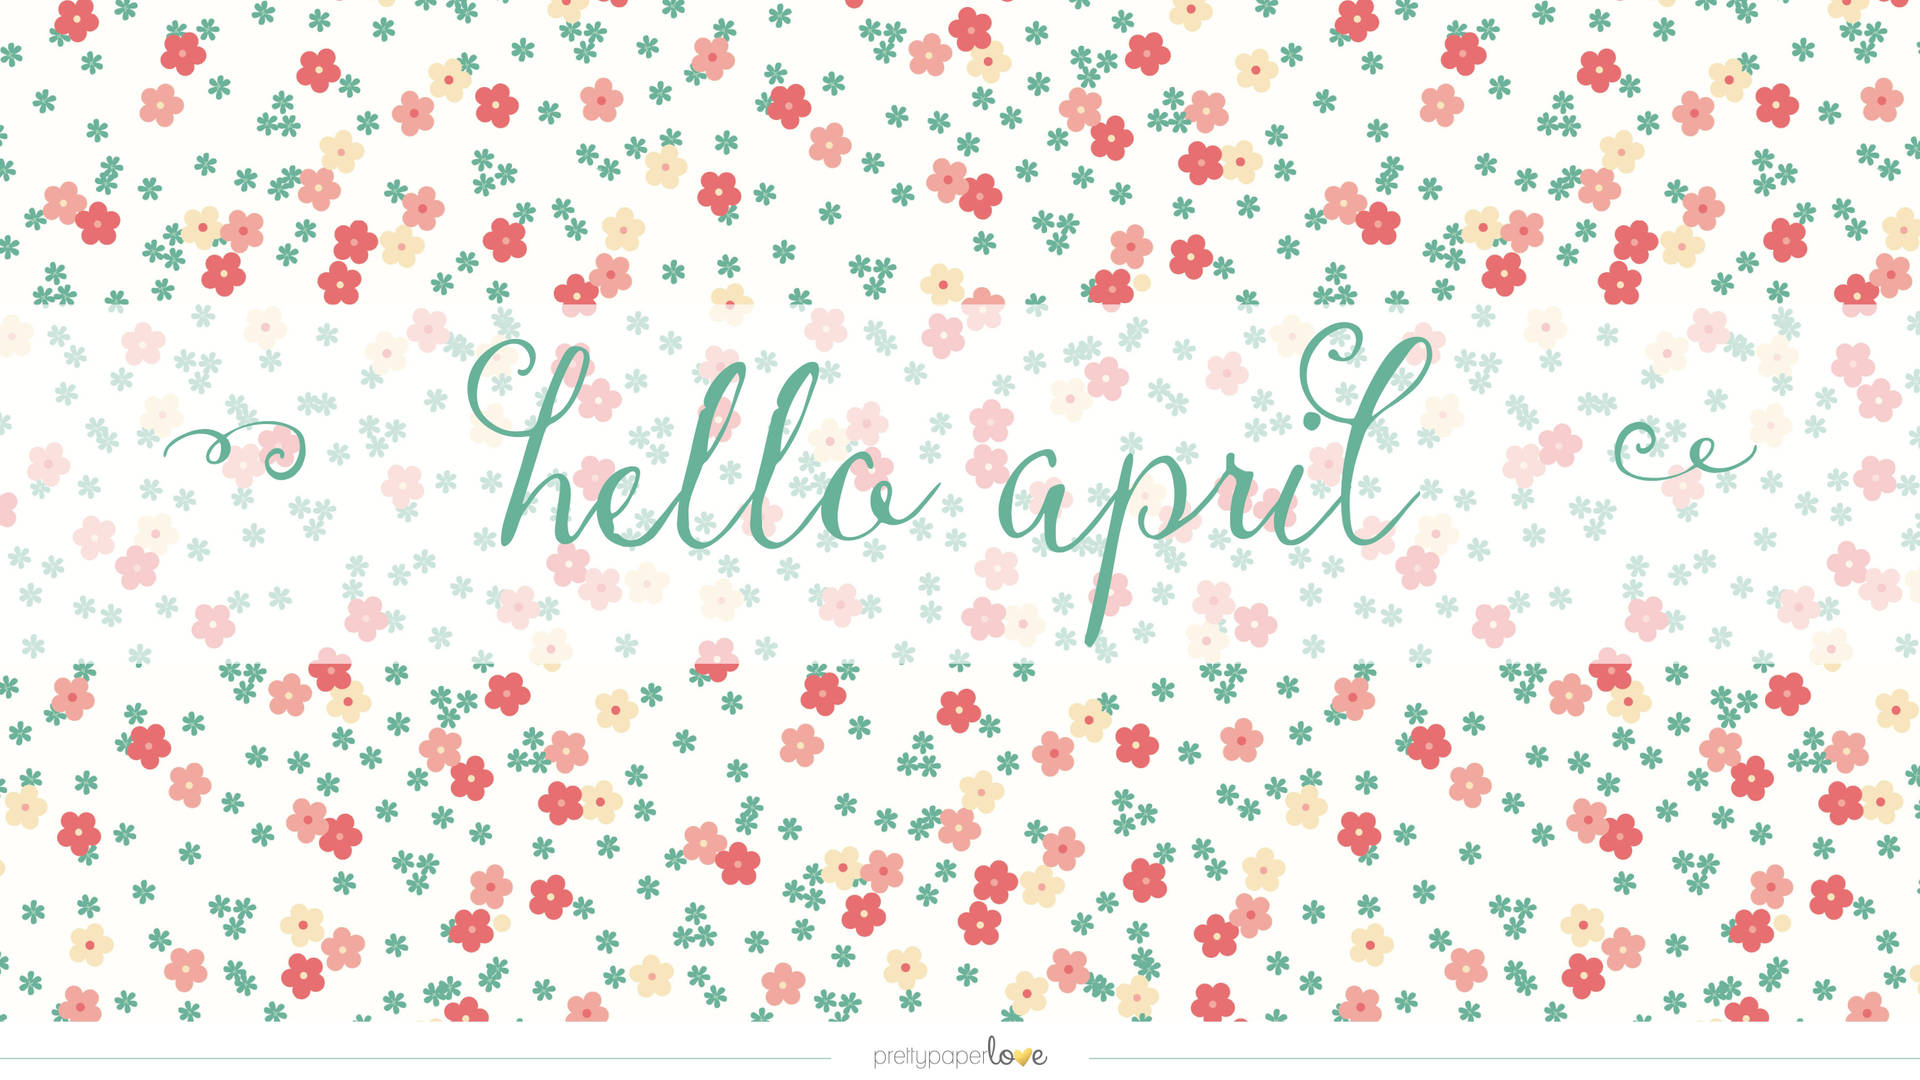 Welcome April with a Gorgeous Floral Art Wallpaper